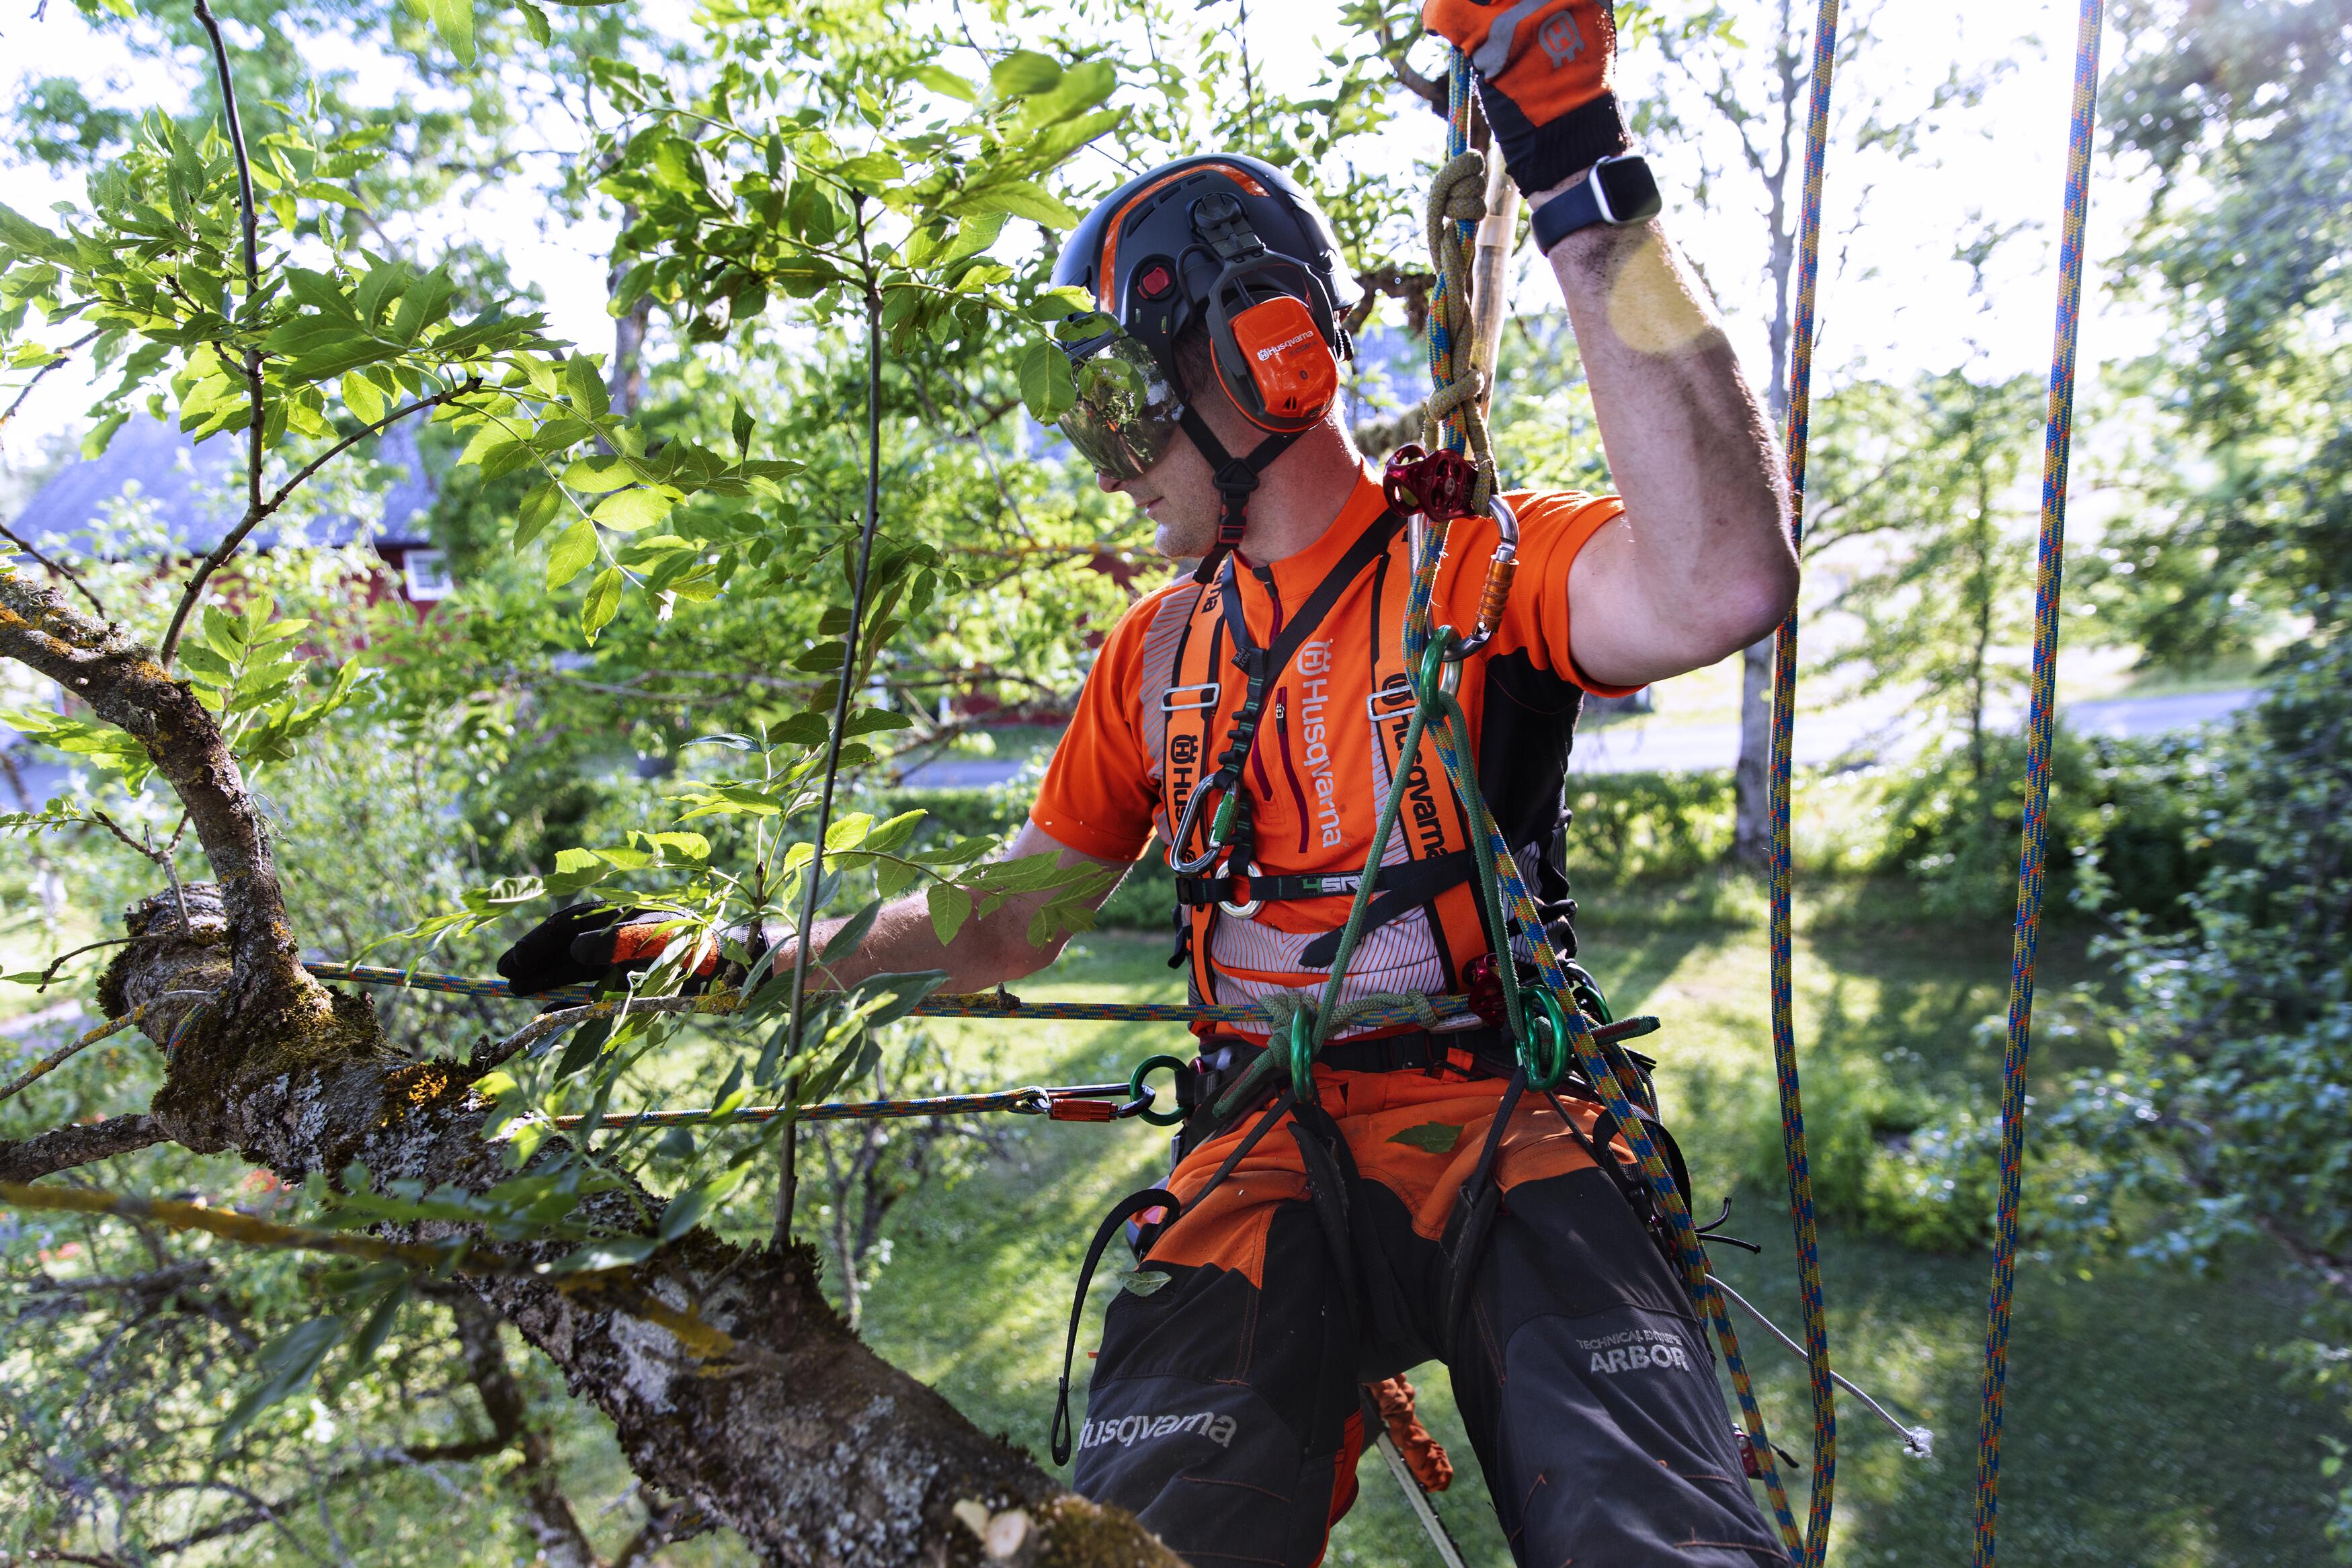 Arborist with Chainsaw T540iXP